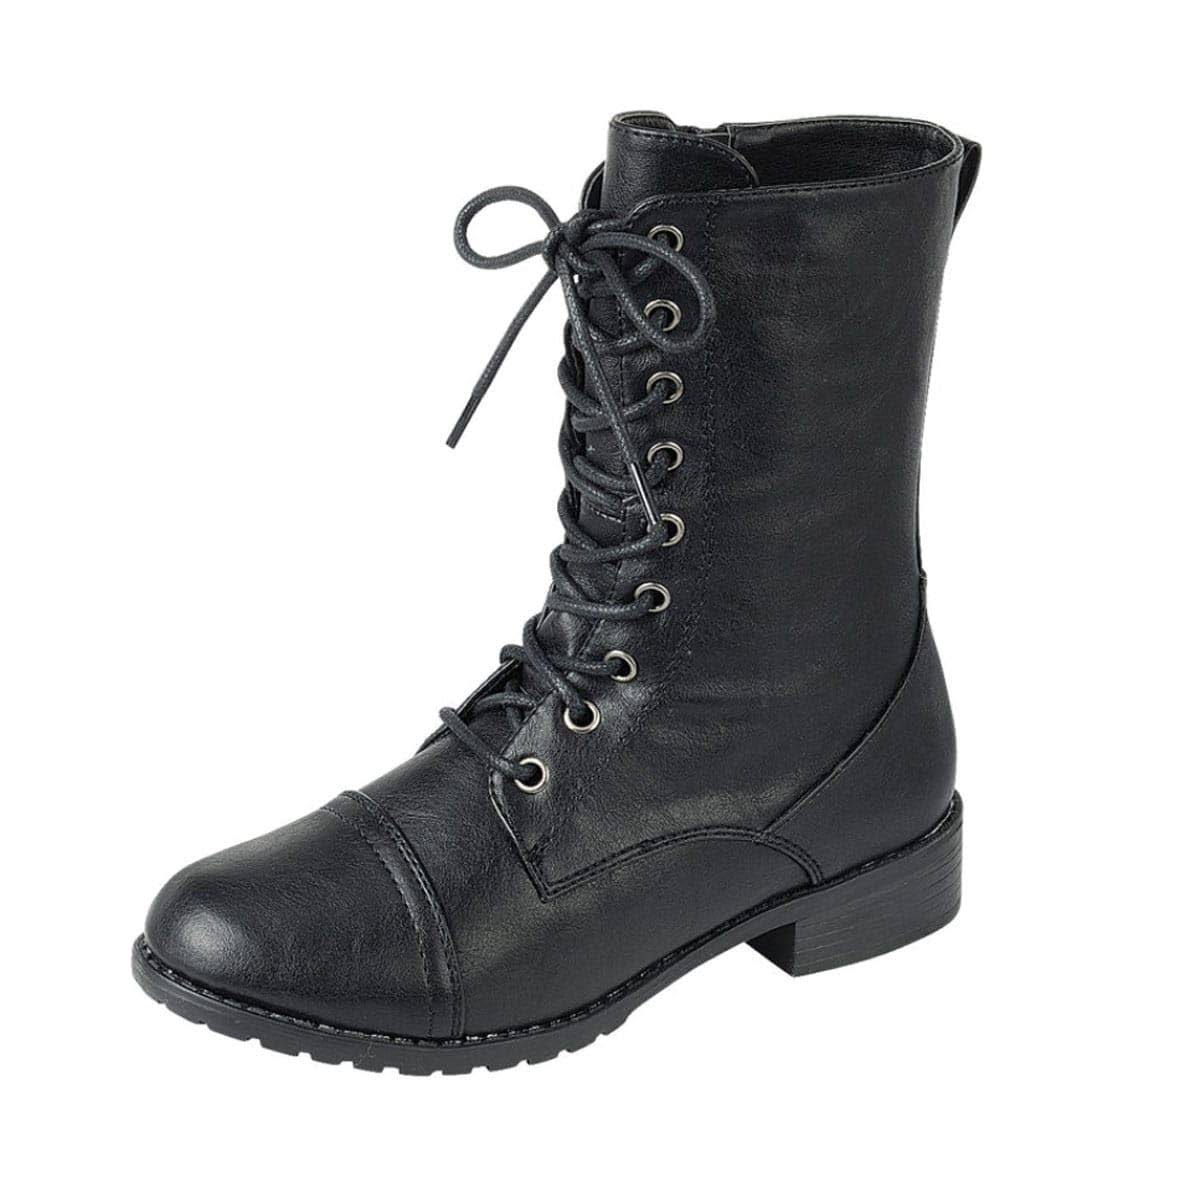 Chic Black Combat Boot with Lace-Up Detail | Image